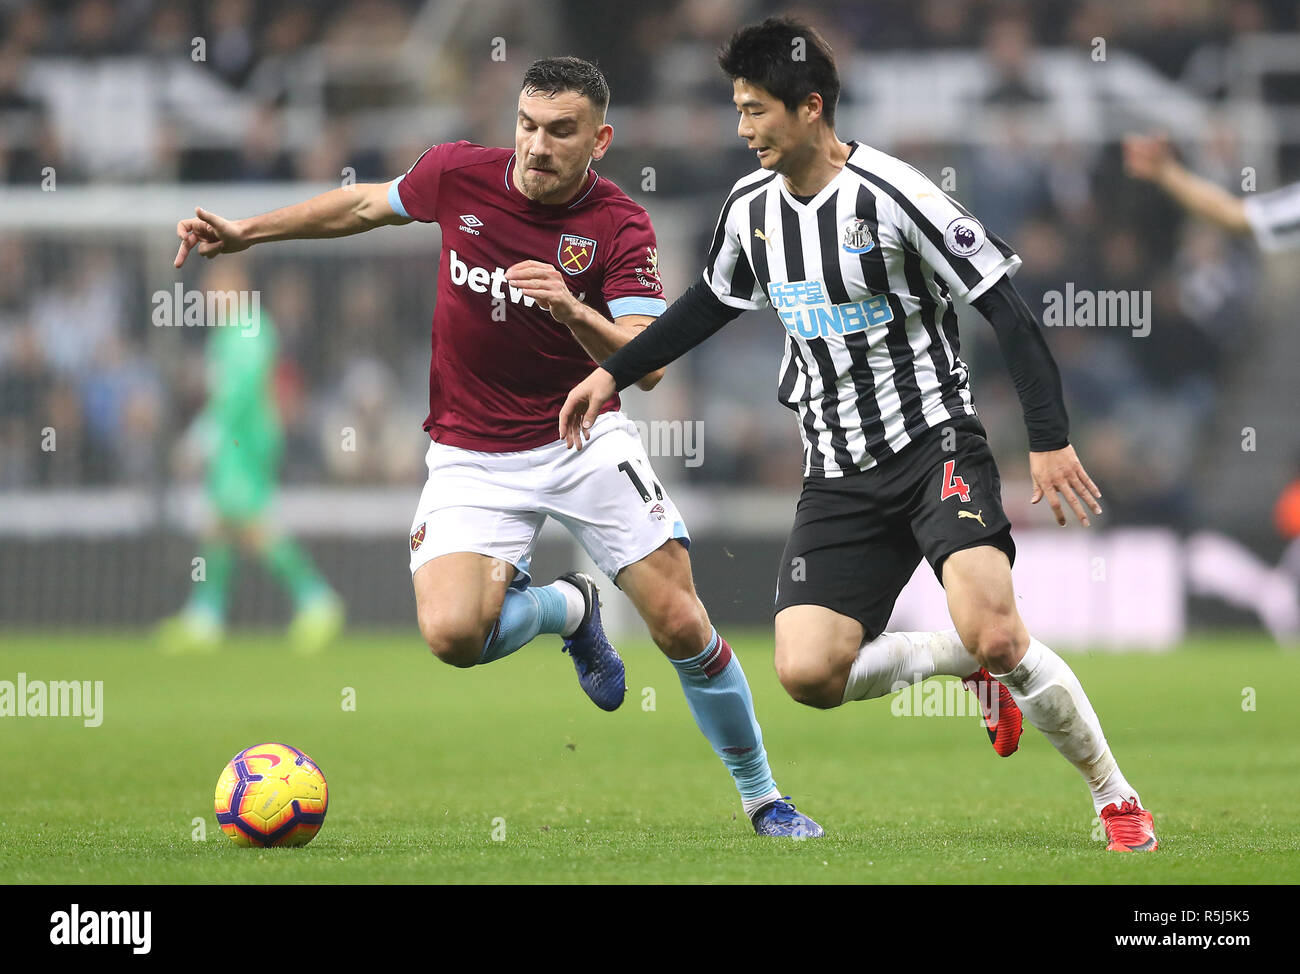 West Ham United's Robert Snodgrass (left) and Newcastle United's Ki Sung-yueng battle for the ball during the Premier League match at St James' Park, Newcastle. Stock Photo